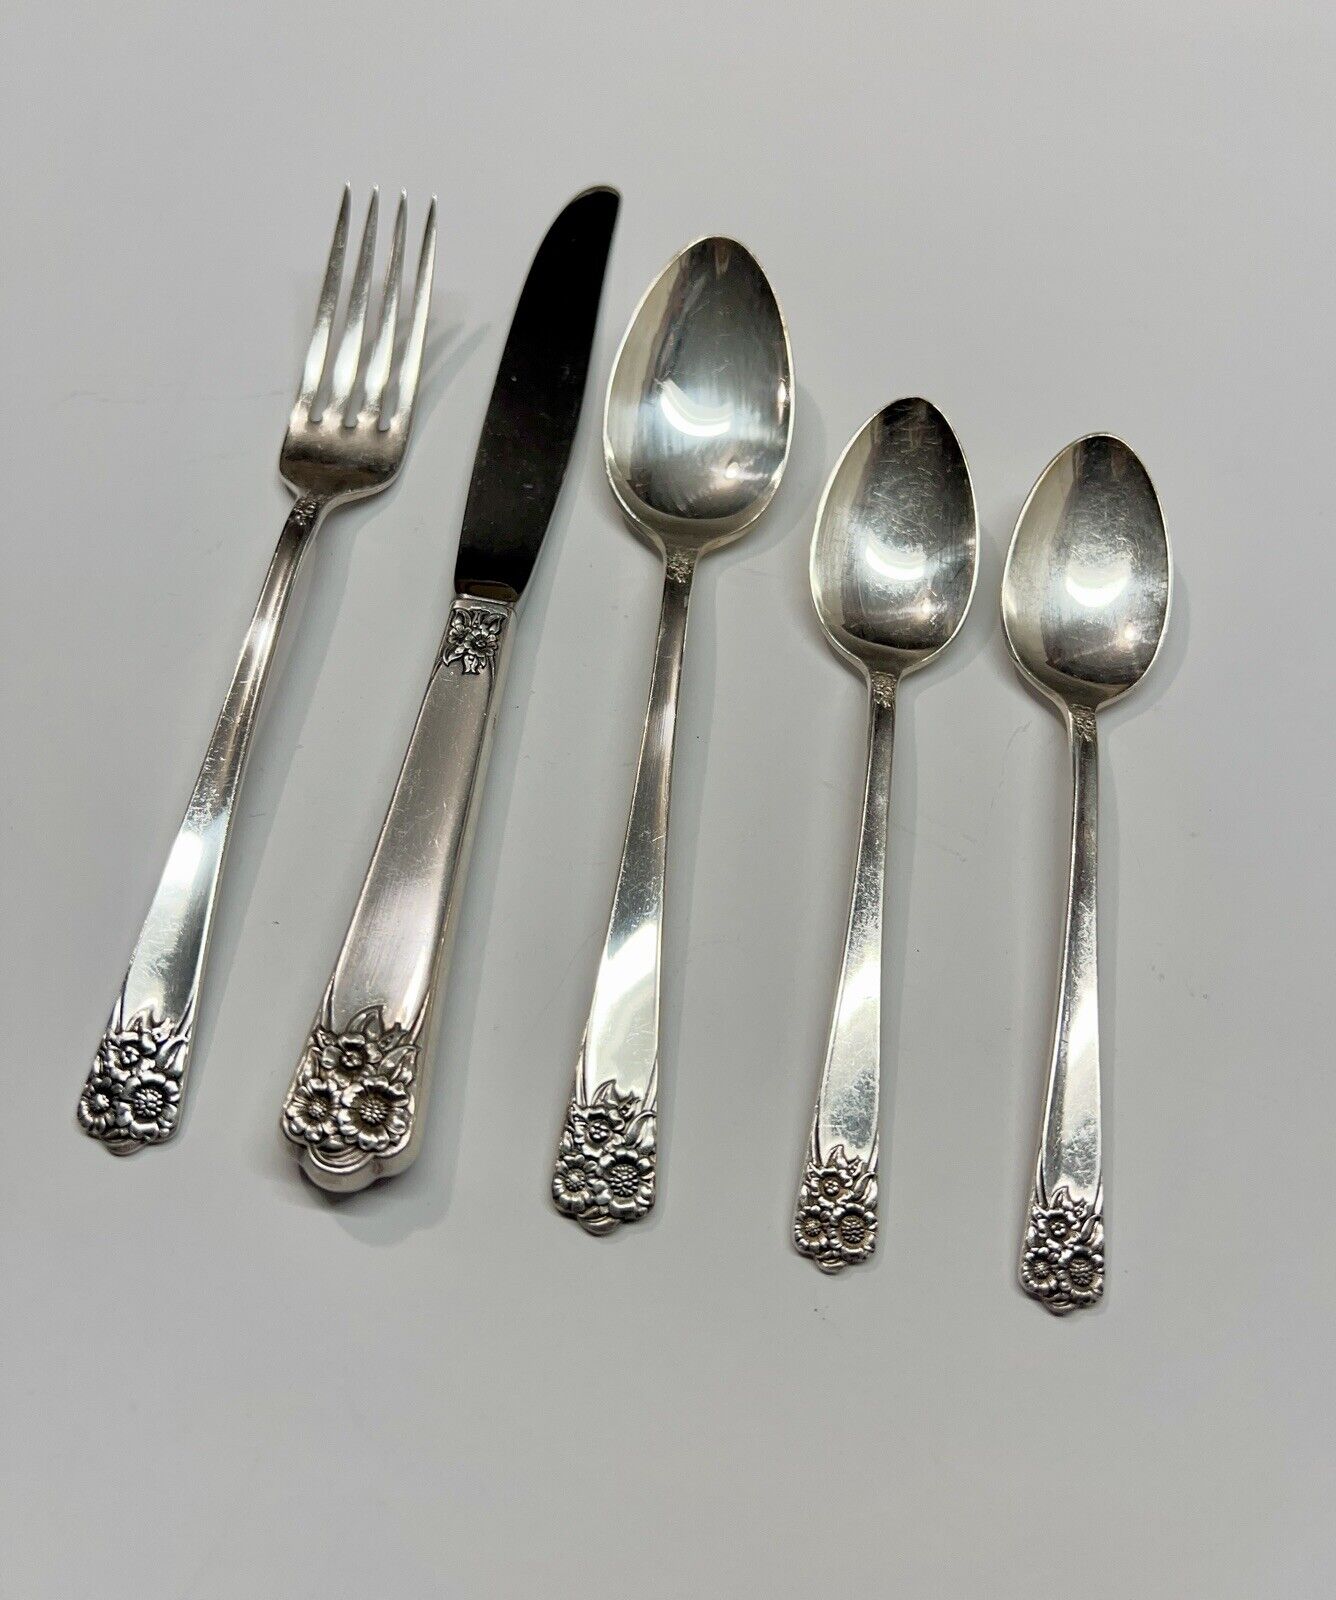 APRIL  Vtg 35 pc WM Rogers & Son IS Silverplate Flatware Service For 6 w Extras